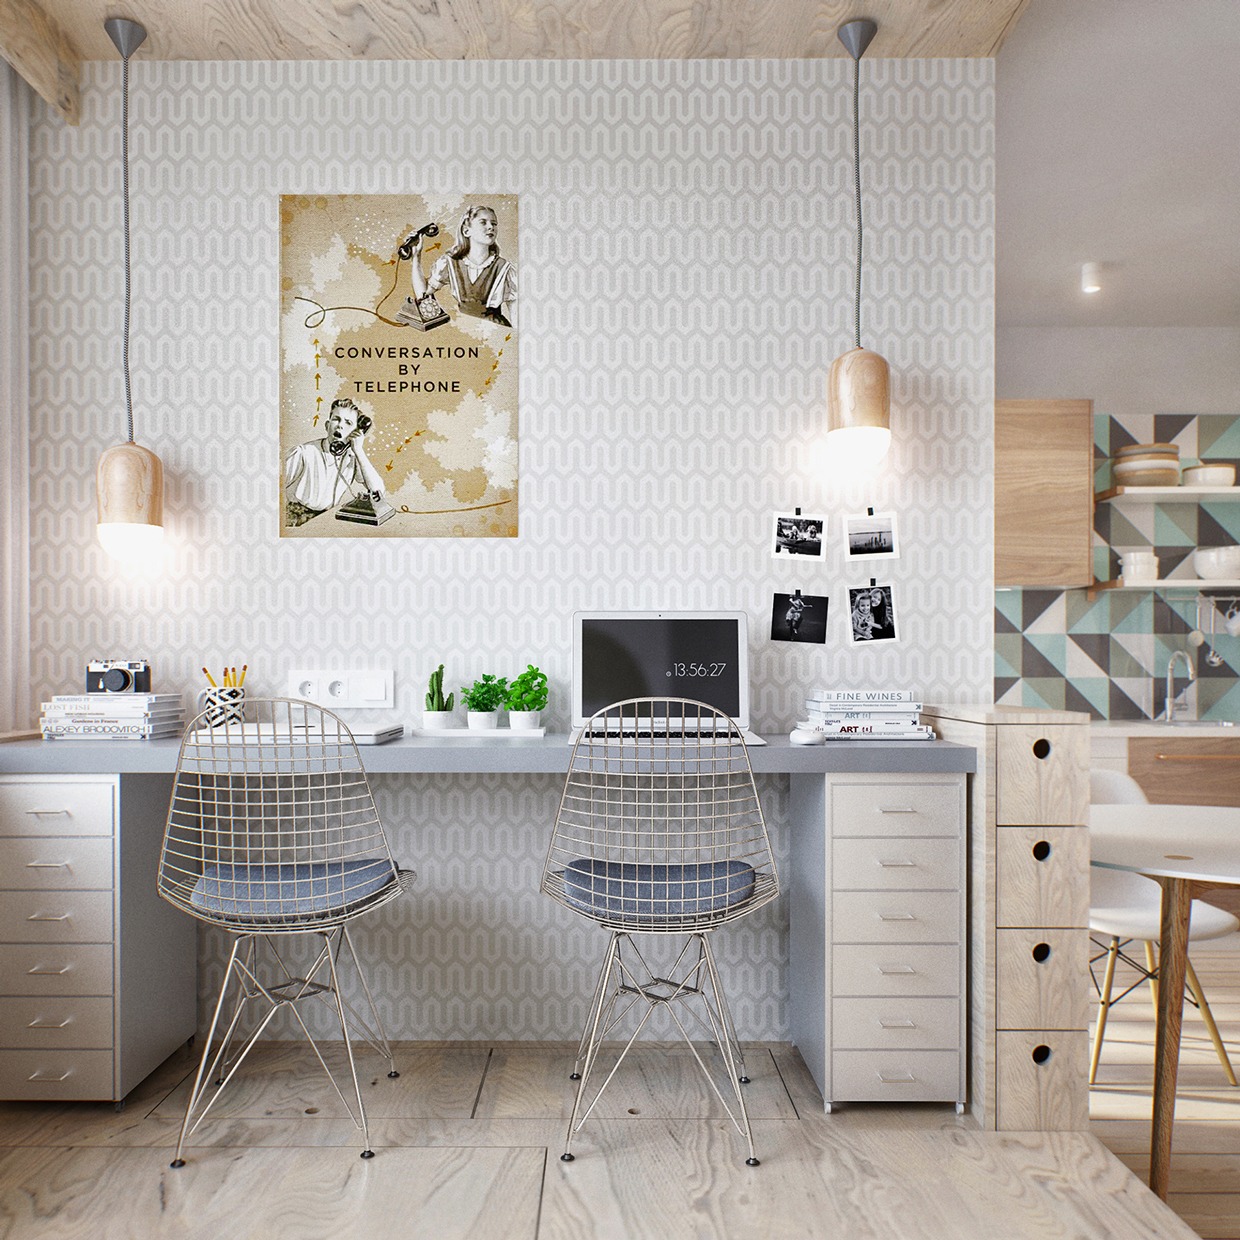 2 Simple Super Beautiful Studio Apartment Concepts For A Young